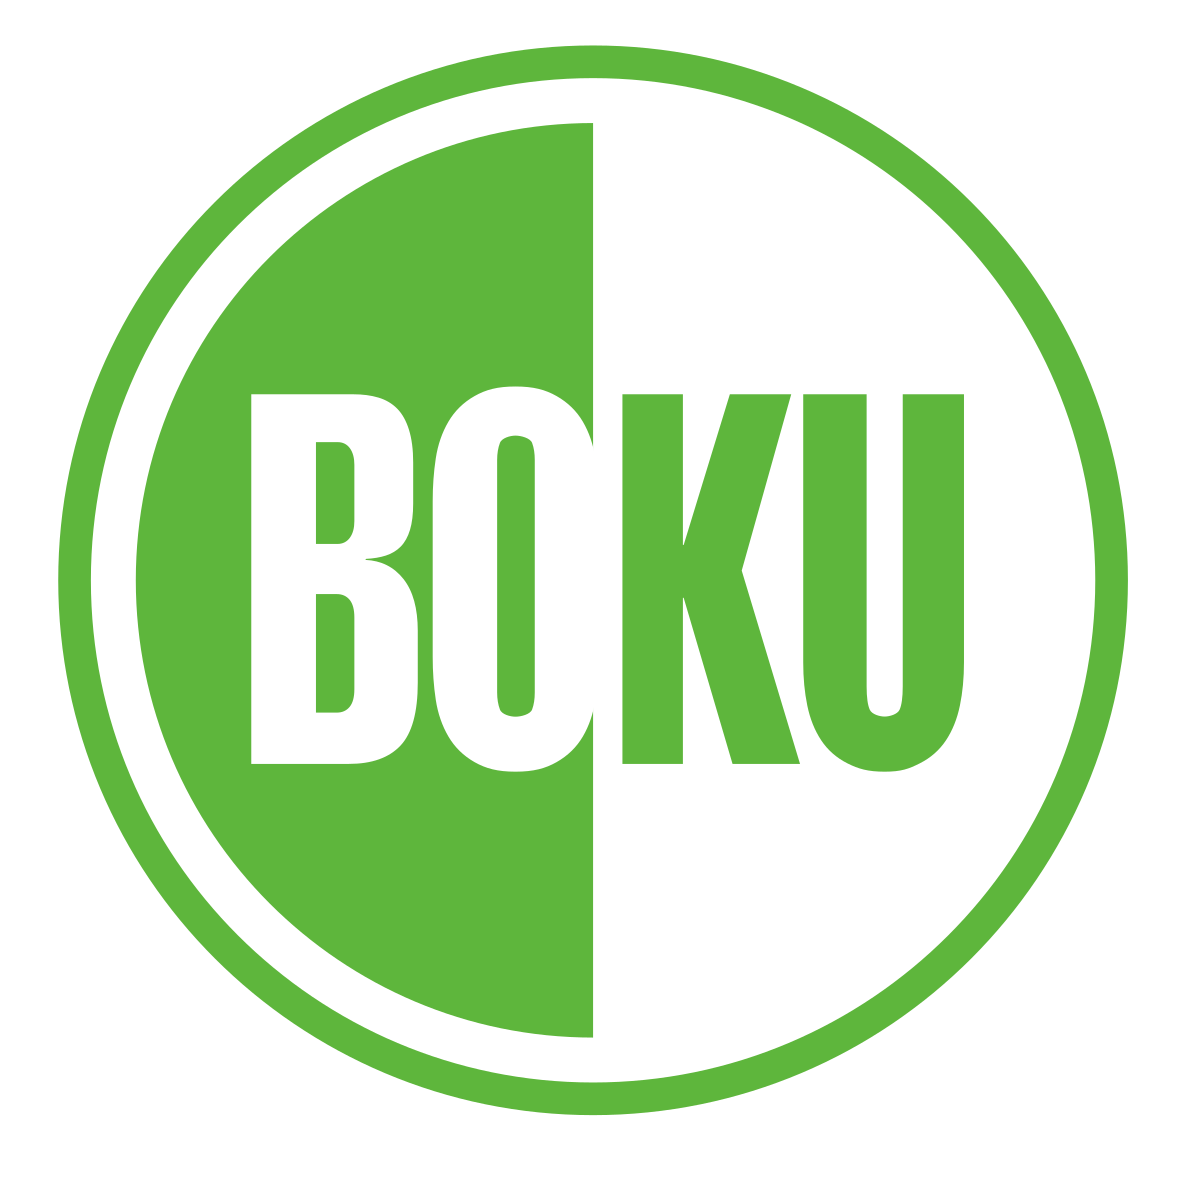 BOKU University of Natural Resources and Life Sciences